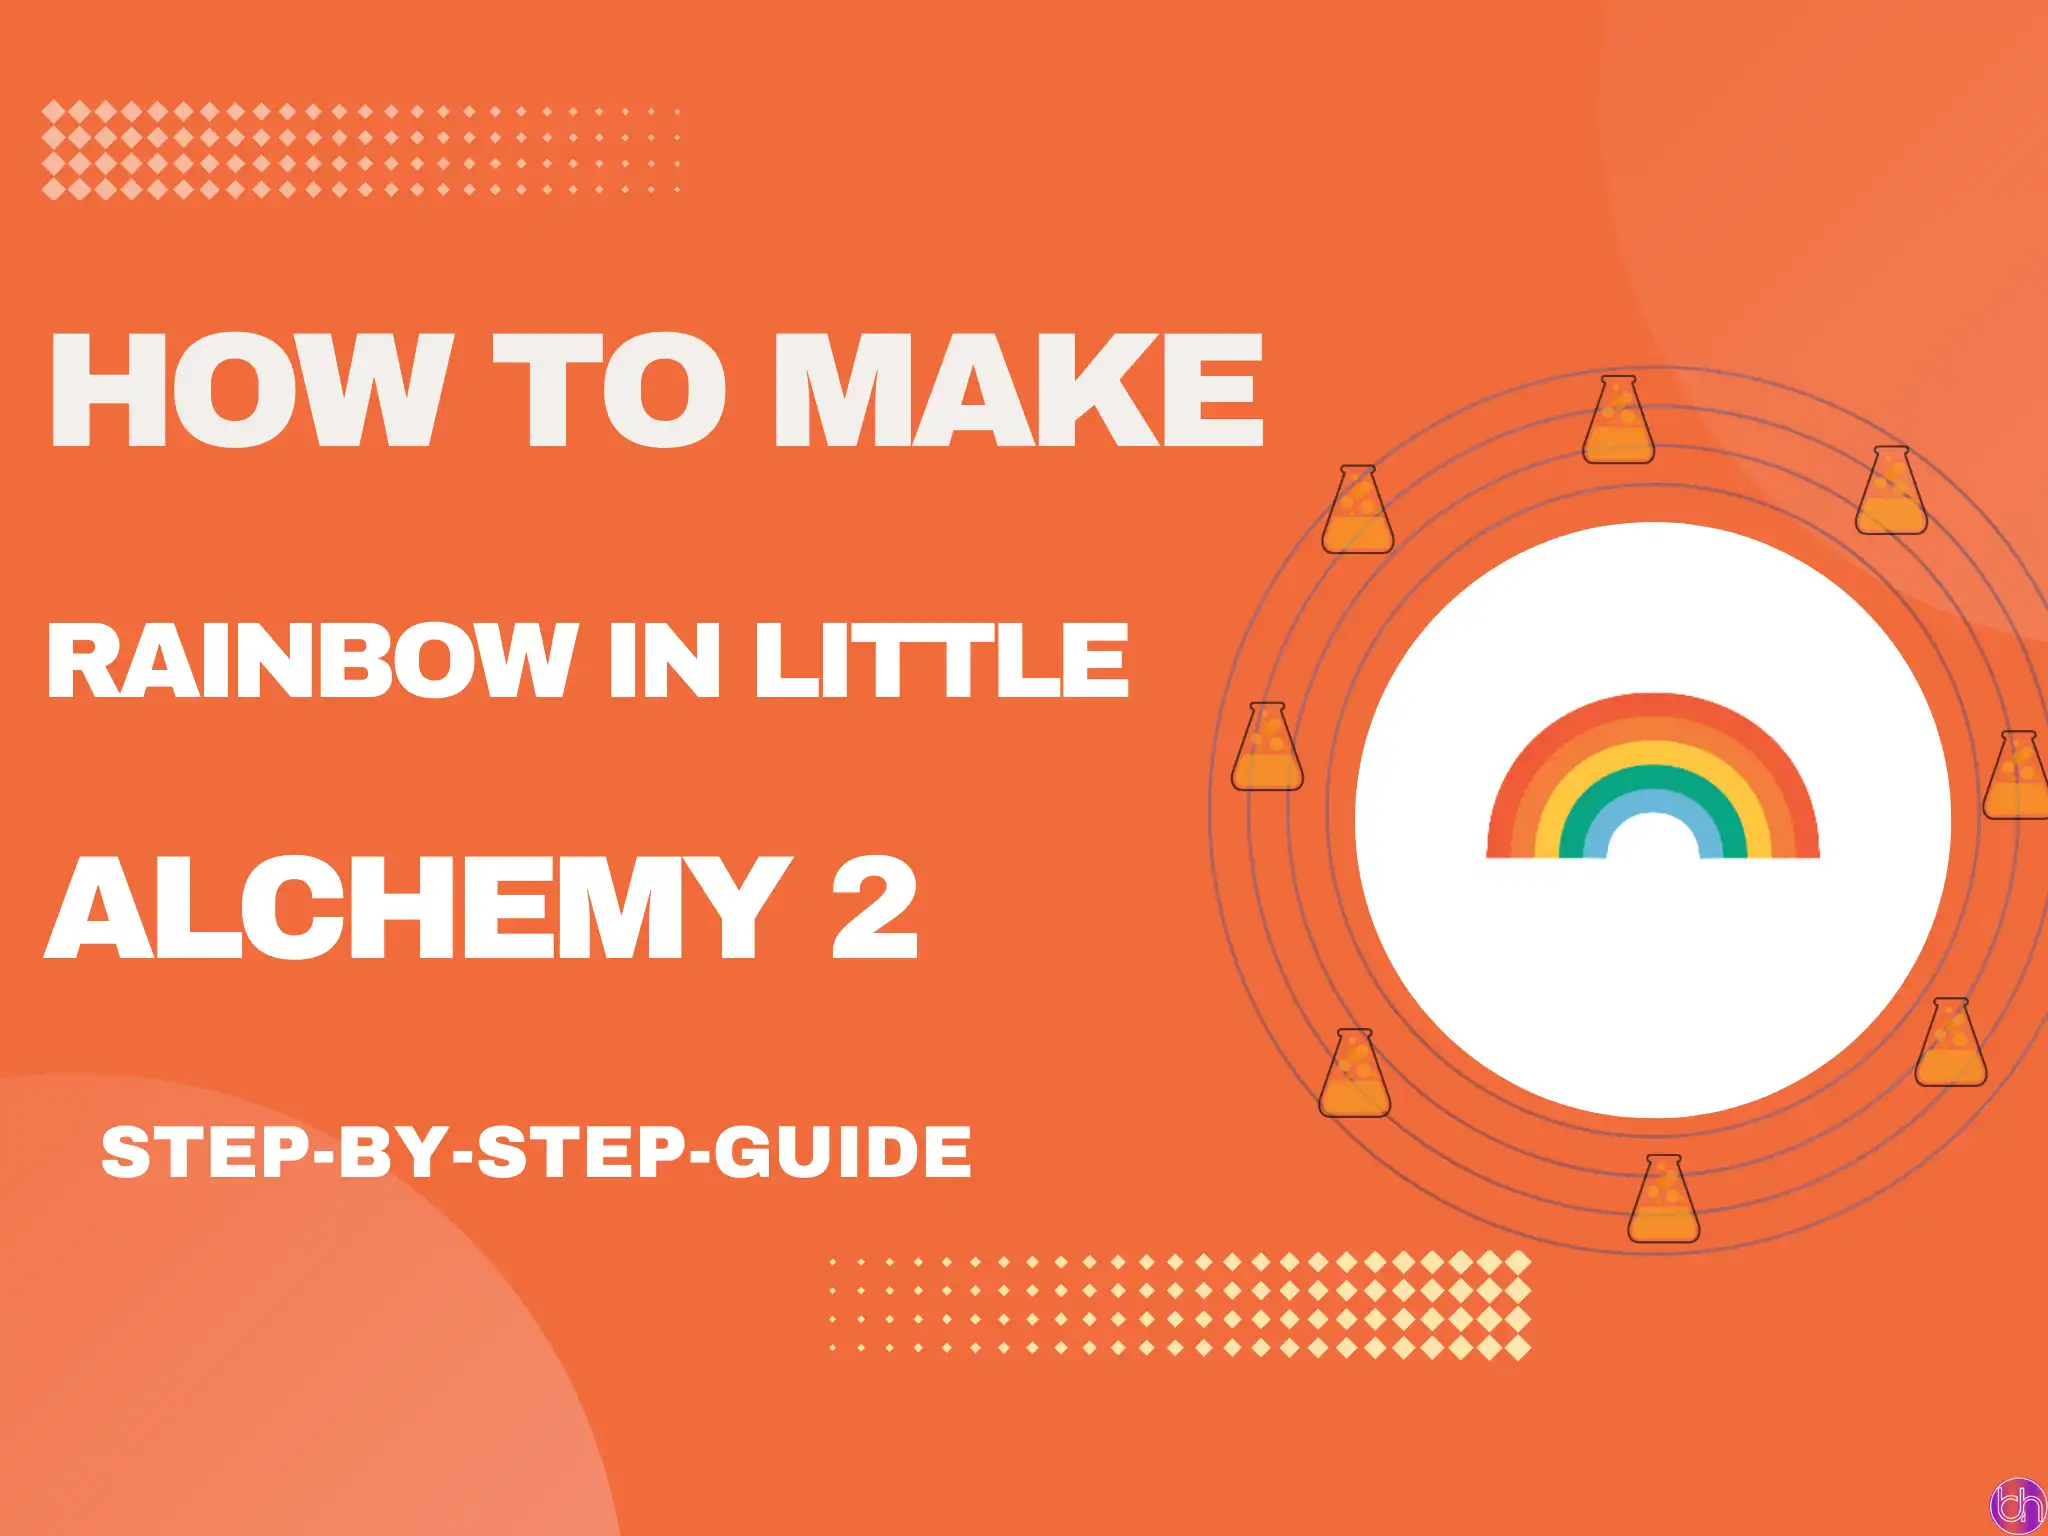 how to make rainbow in little alchemy 2